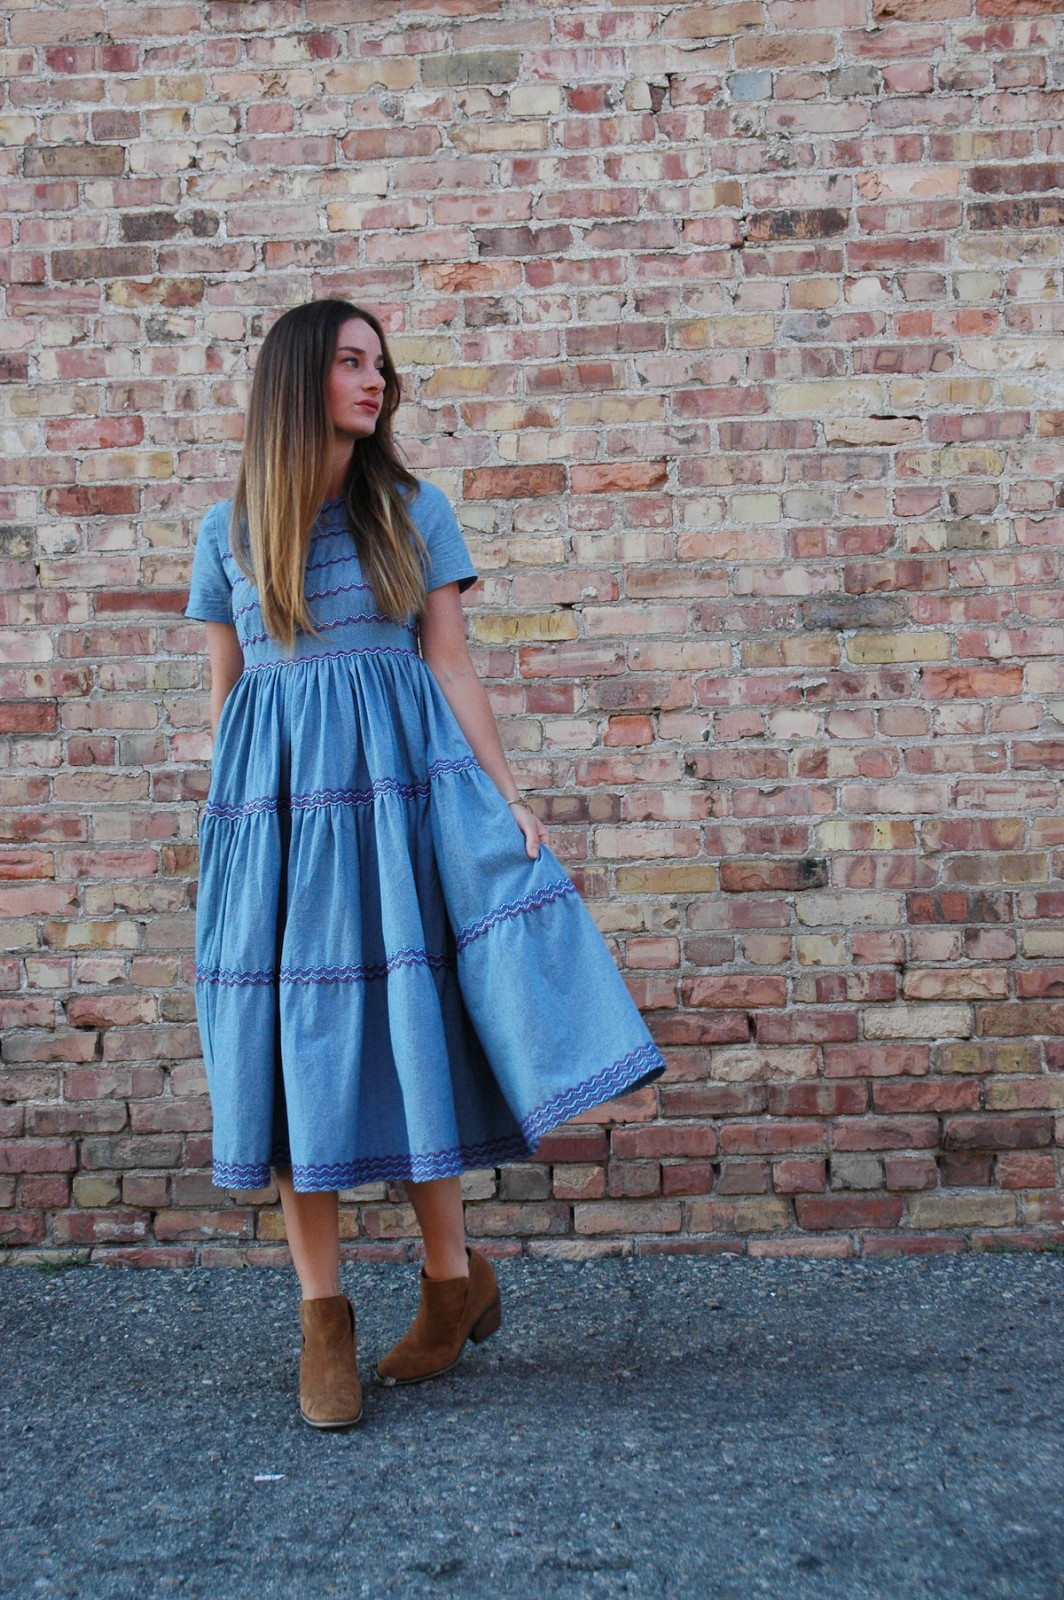 How to Sew a Tiered Dress with Trim - WeAllSew